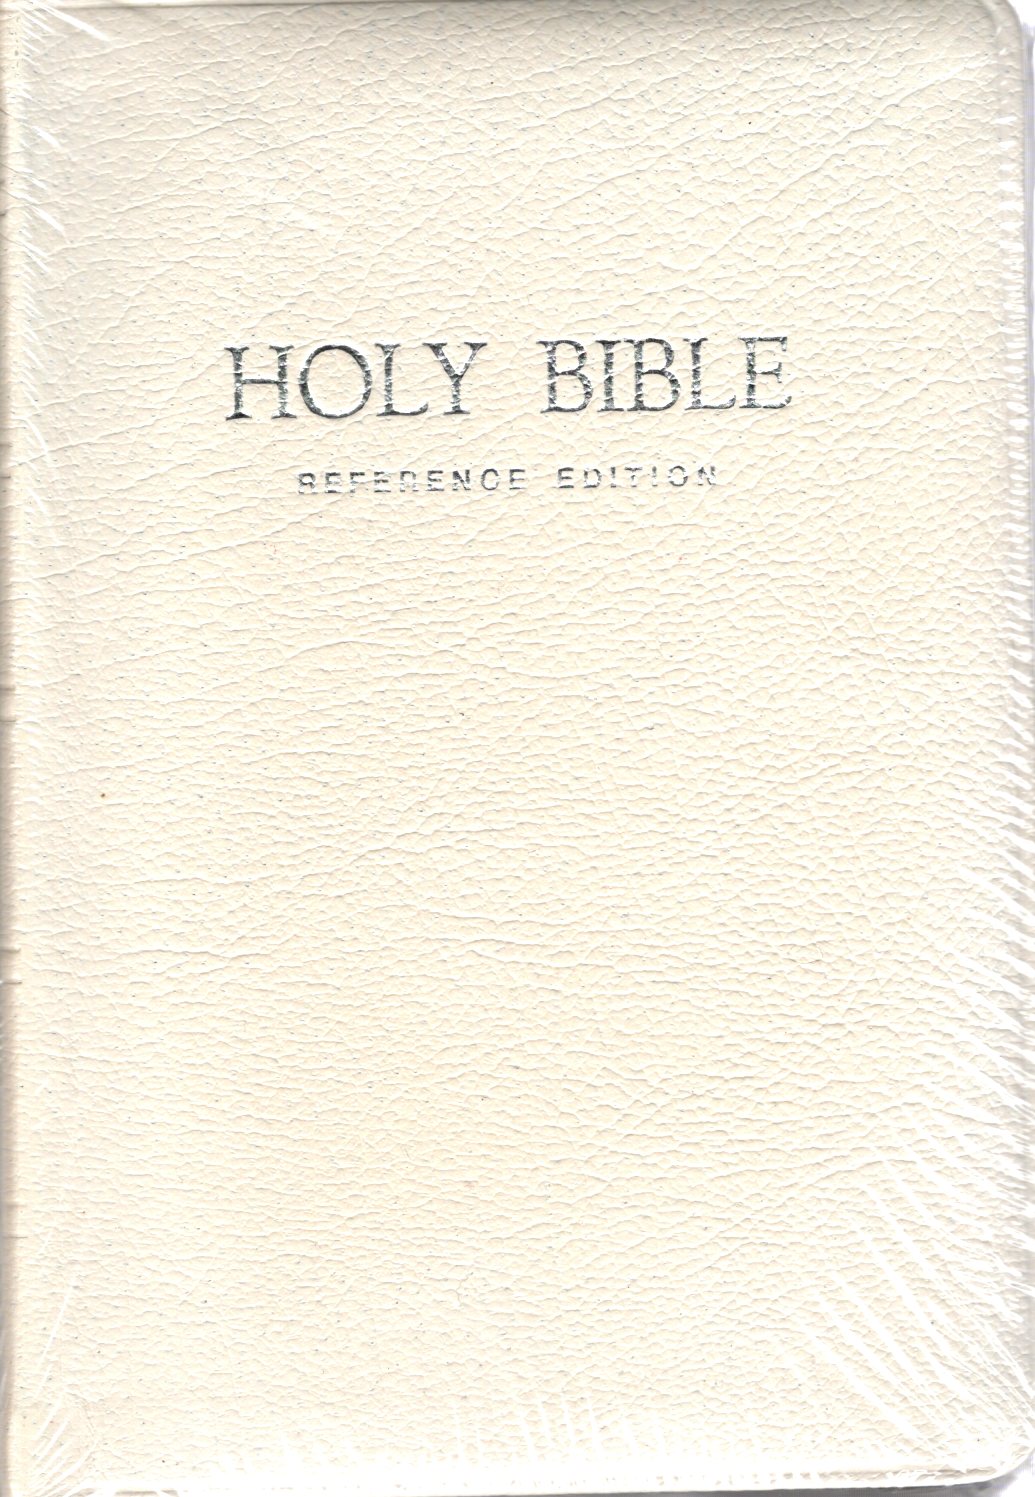 Thomas Nelson KJV Imperial Reference Bible (1972) - Genuine Leather (White)